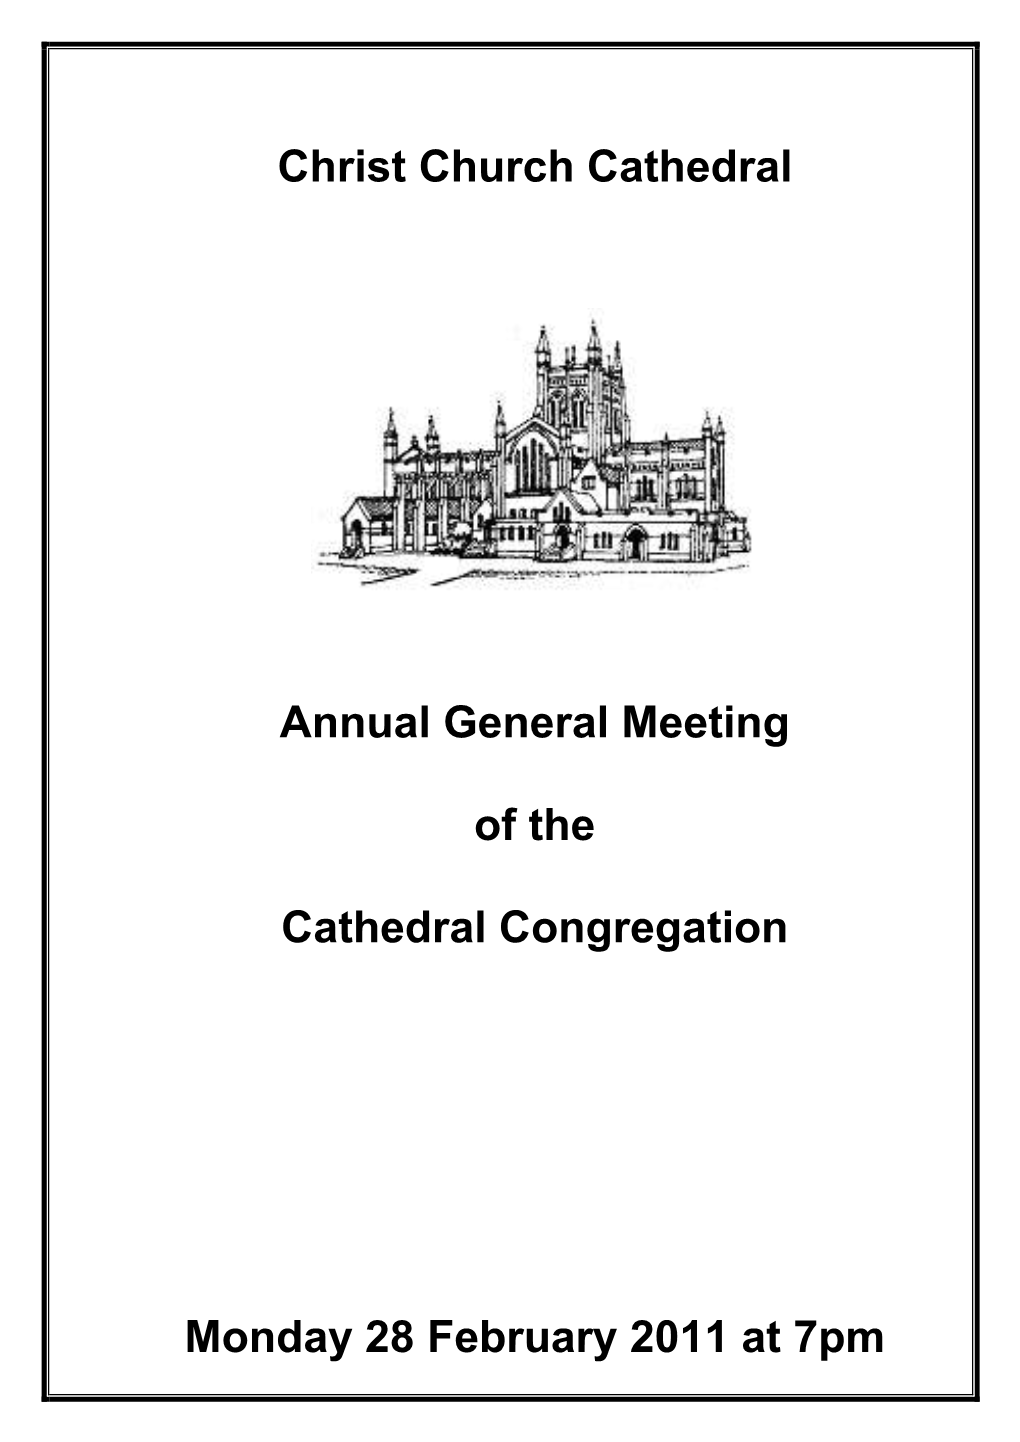 Christ Church Cathedral Annual General Meeting of the Cathedral